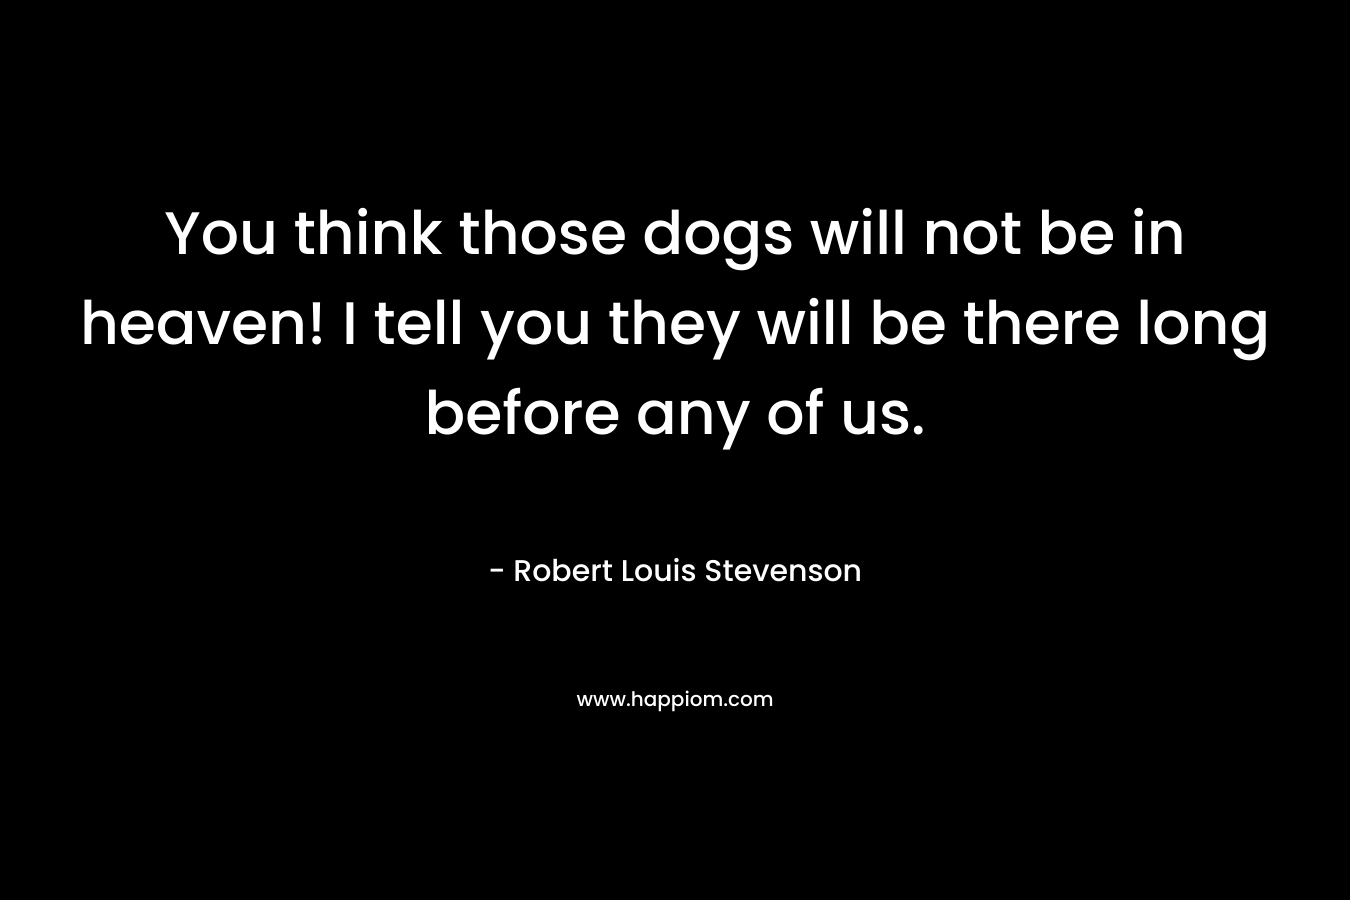 You think those dogs will not be in heaven! I tell you they will be there long before any of us. – Robert Louis Stevenson